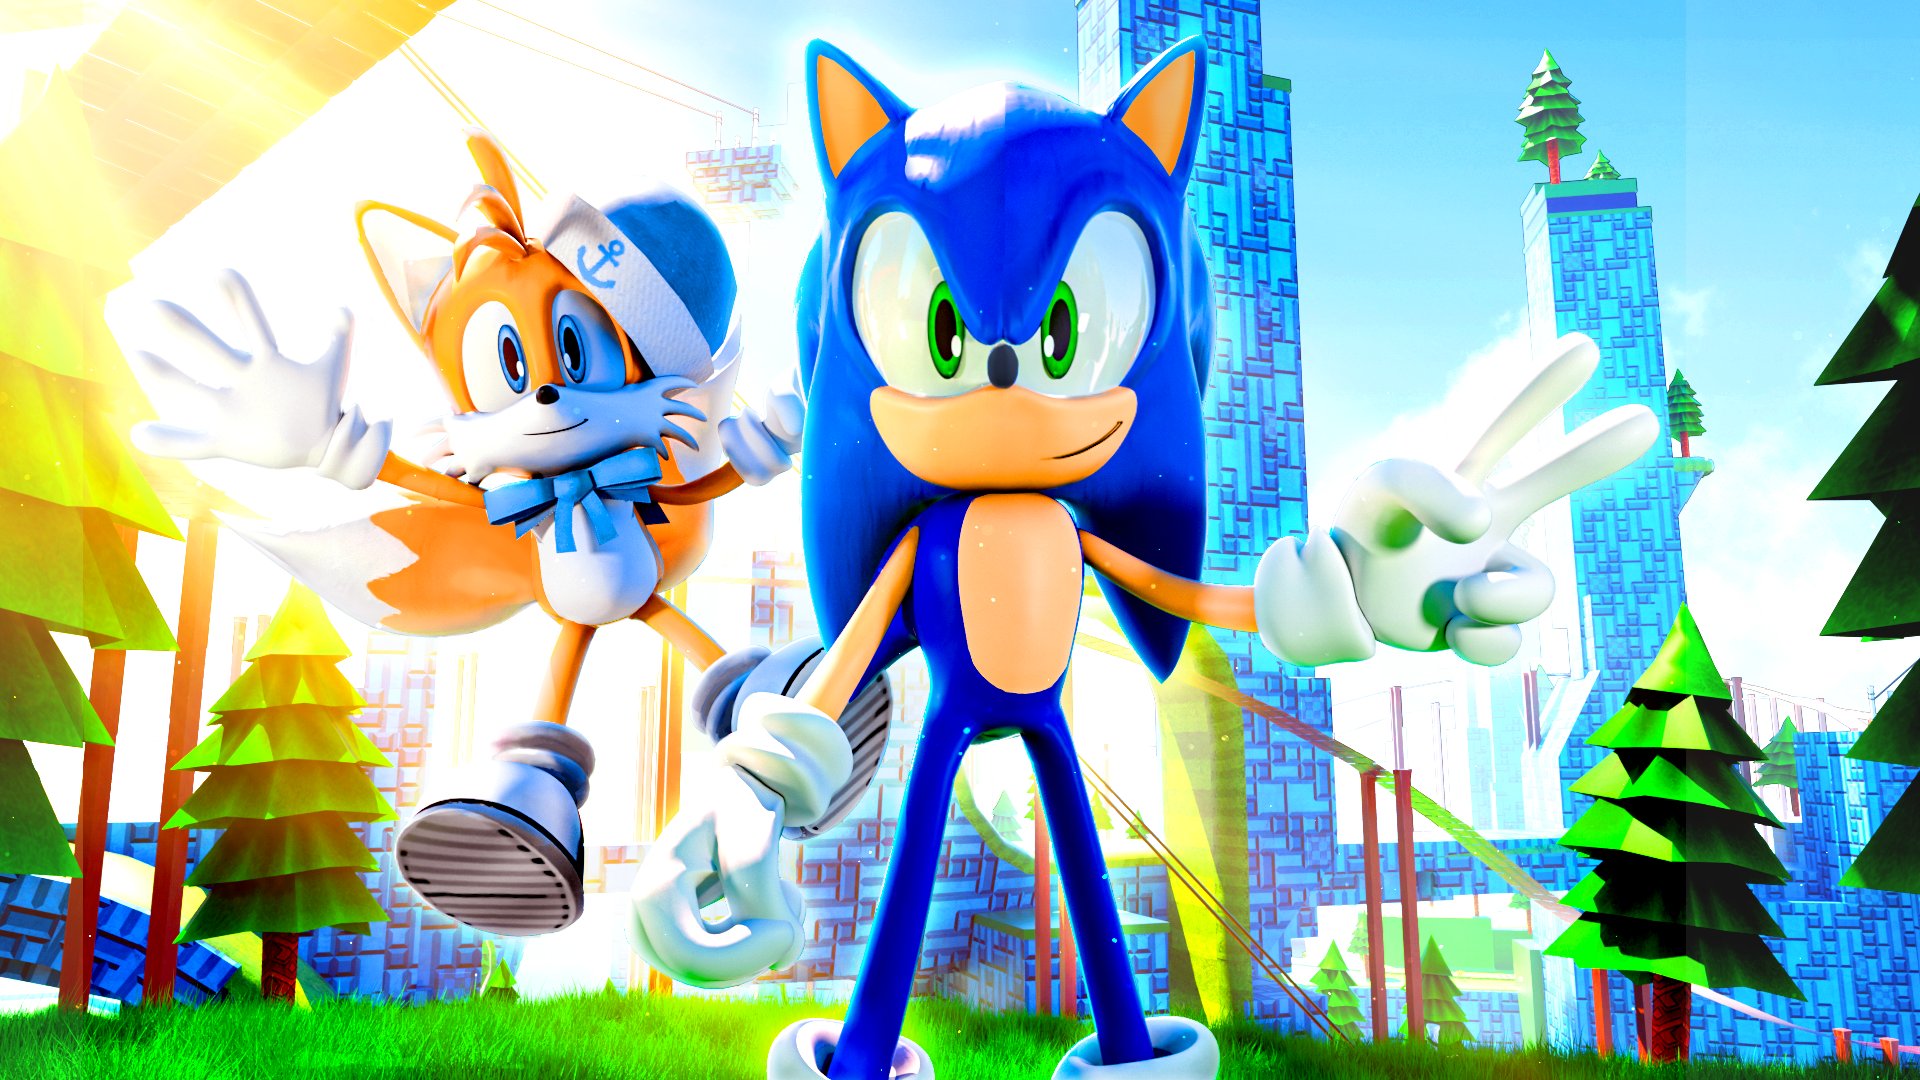 Gamefam Studios on X: The NEW Sonic Speed Simulator update is now live!  #SonicRoblox ◉ Knuckles ❤️ ◉ Sonic Riders Skin 😮 ◉ Limited-Time Chao 👀 ◉  New Race Course ◉ Gratuity